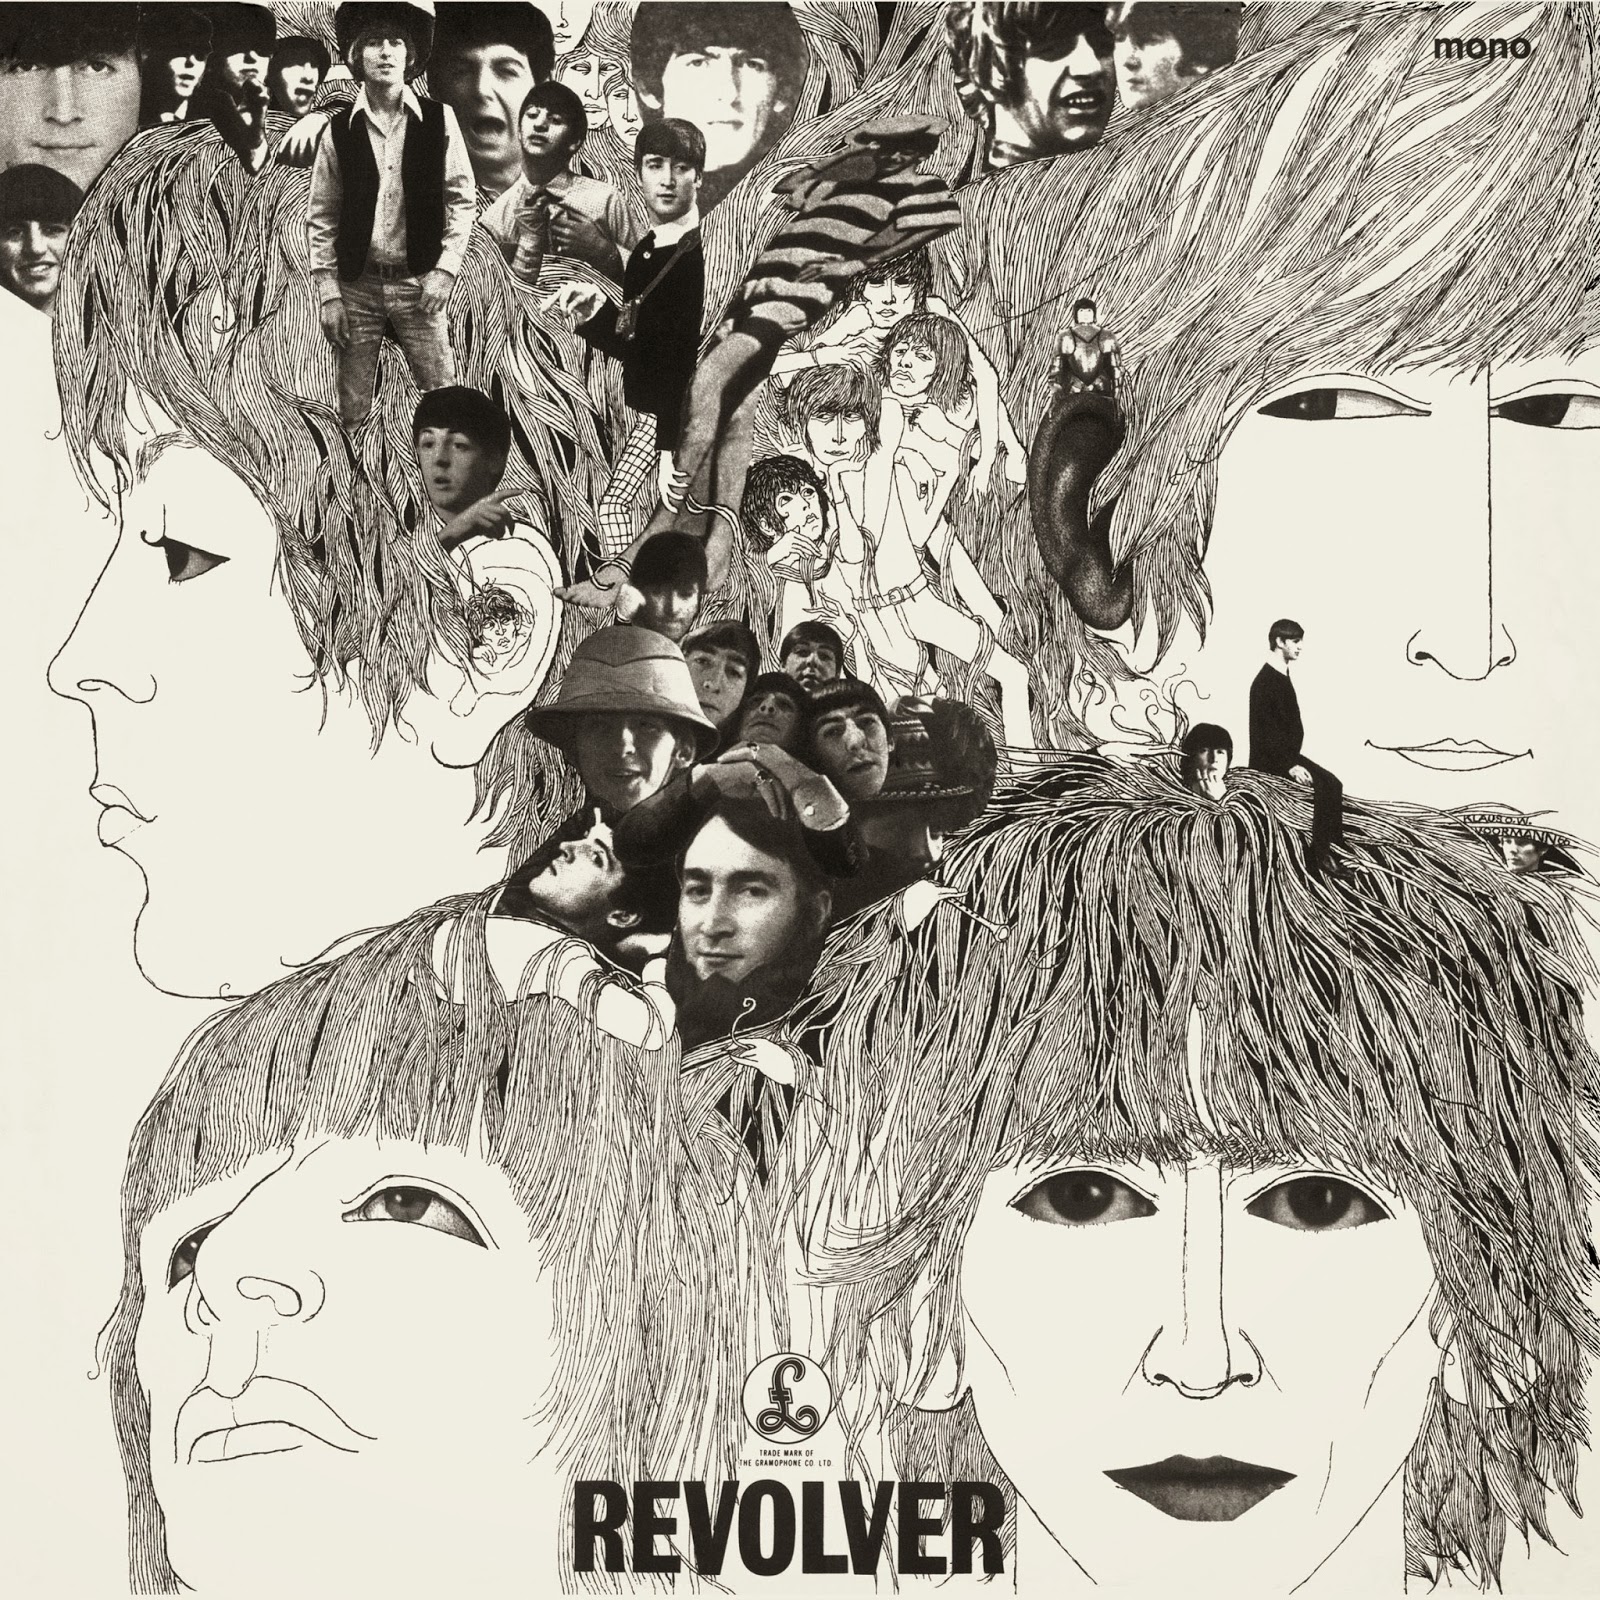 "Revolver" by The Beatles album cover. Various pictures of the members are placed around the cover scrapbook style while large, pencil drawn portraits make the bulk of the cover